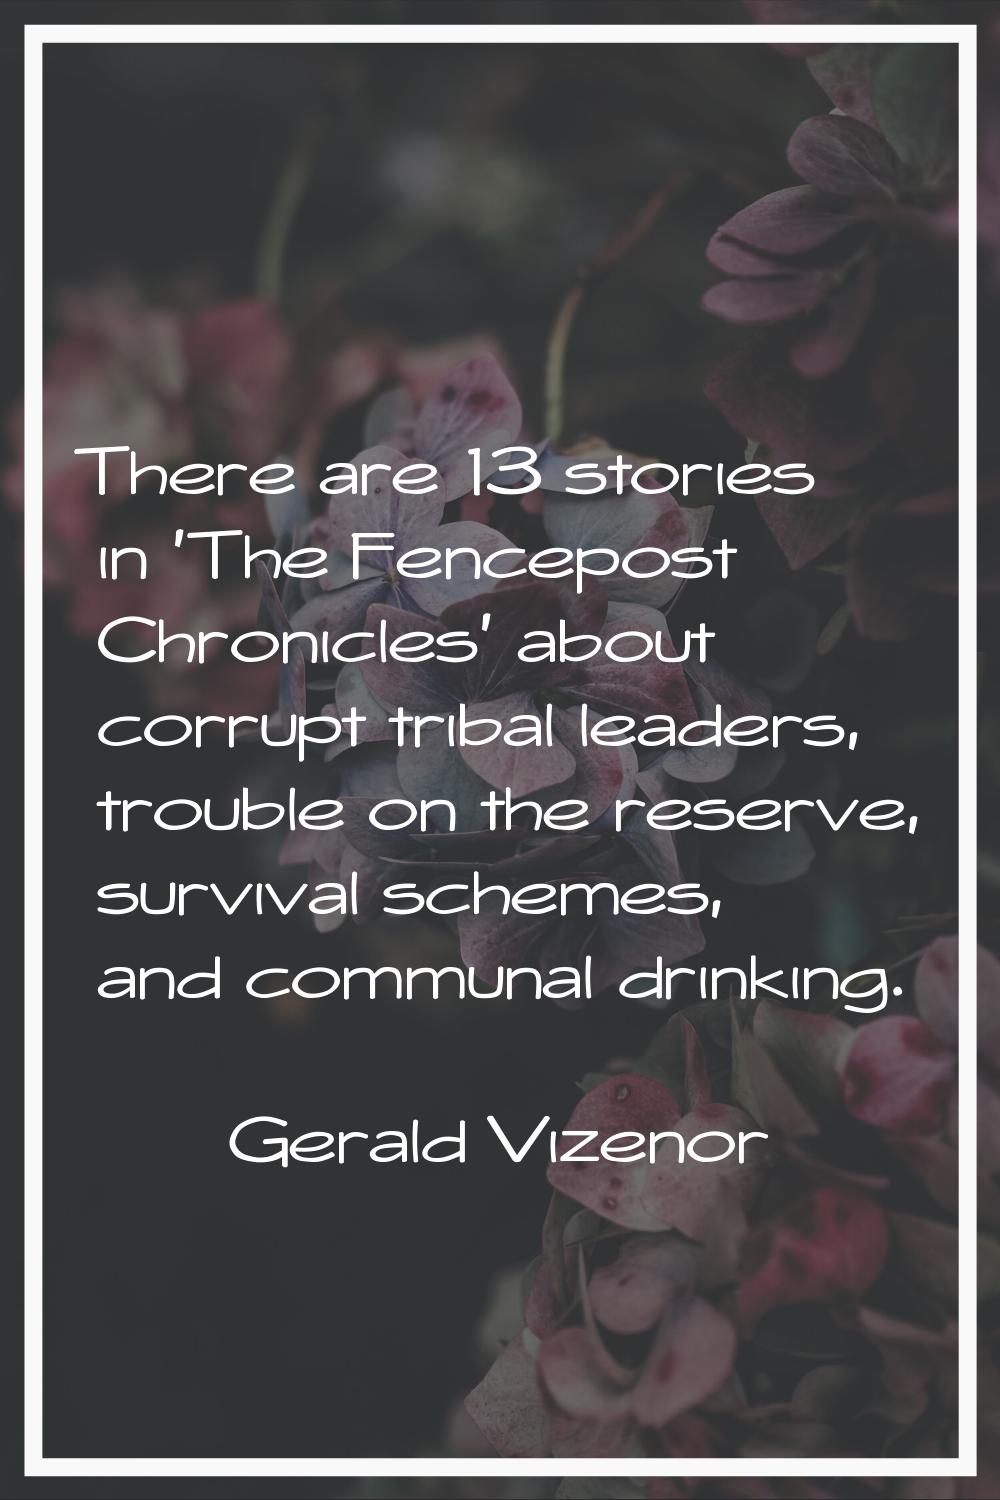 There are 13 stories in 'The Fencepost Chronicles' about corrupt tribal leaders, trouble on the res